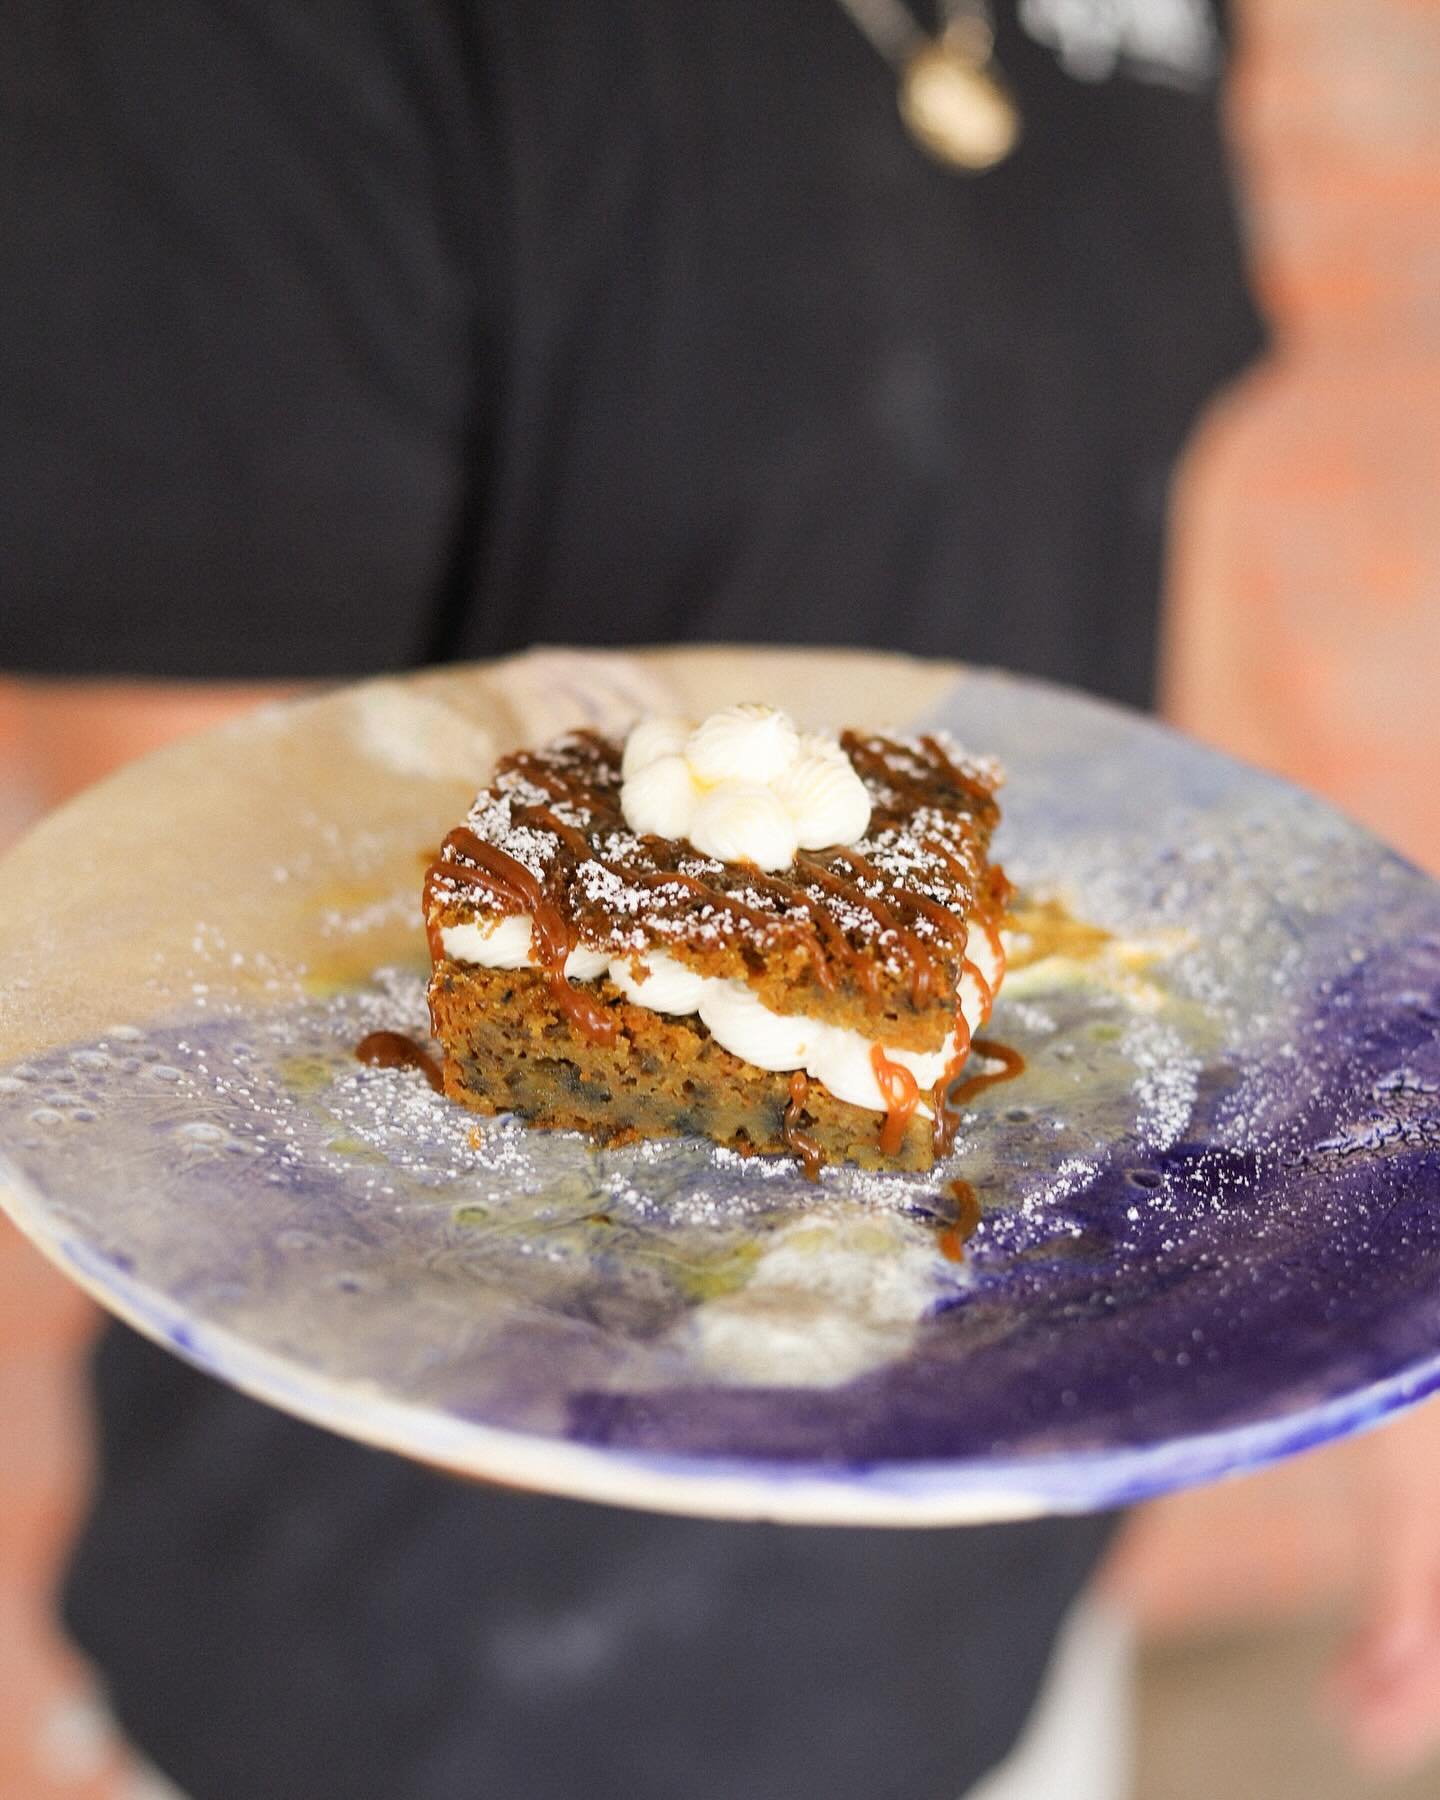 Sweet Treat O&rsquo;Clock!!! Our newest dessert item is going to be a truly delectable Carrot Cake with a Caramel Drizzle!!

Walk-ins always welcome. Menu, reservations + more at RoninTX.com 🤠

📸: @jadynscamera 
🍰: @zaeden.martinez